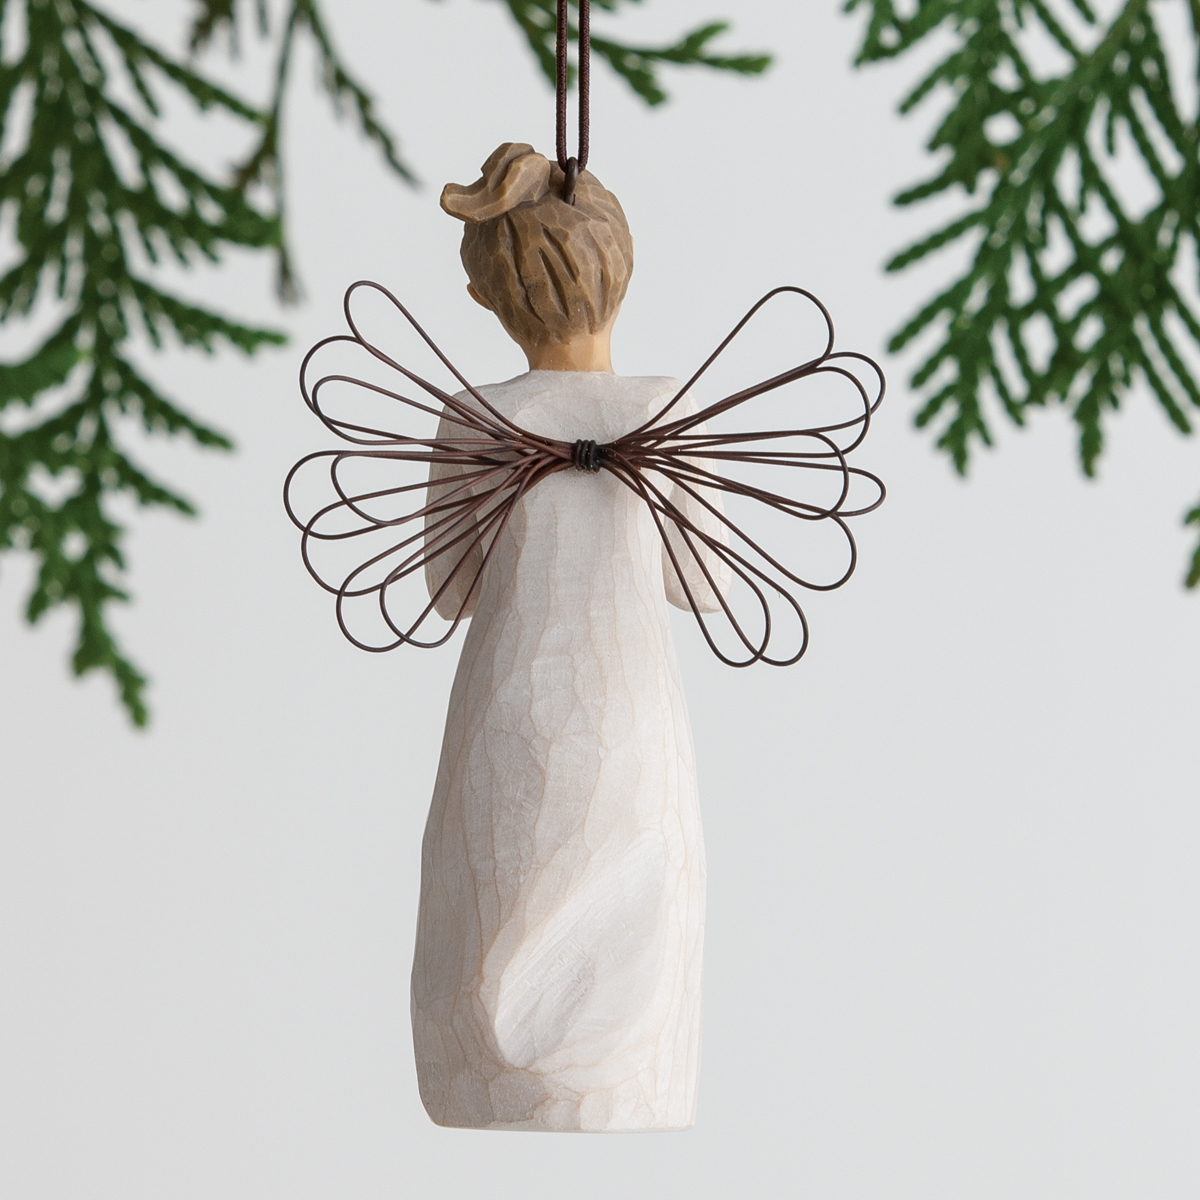 Willow Tree - You're the Best! Ornament 27468